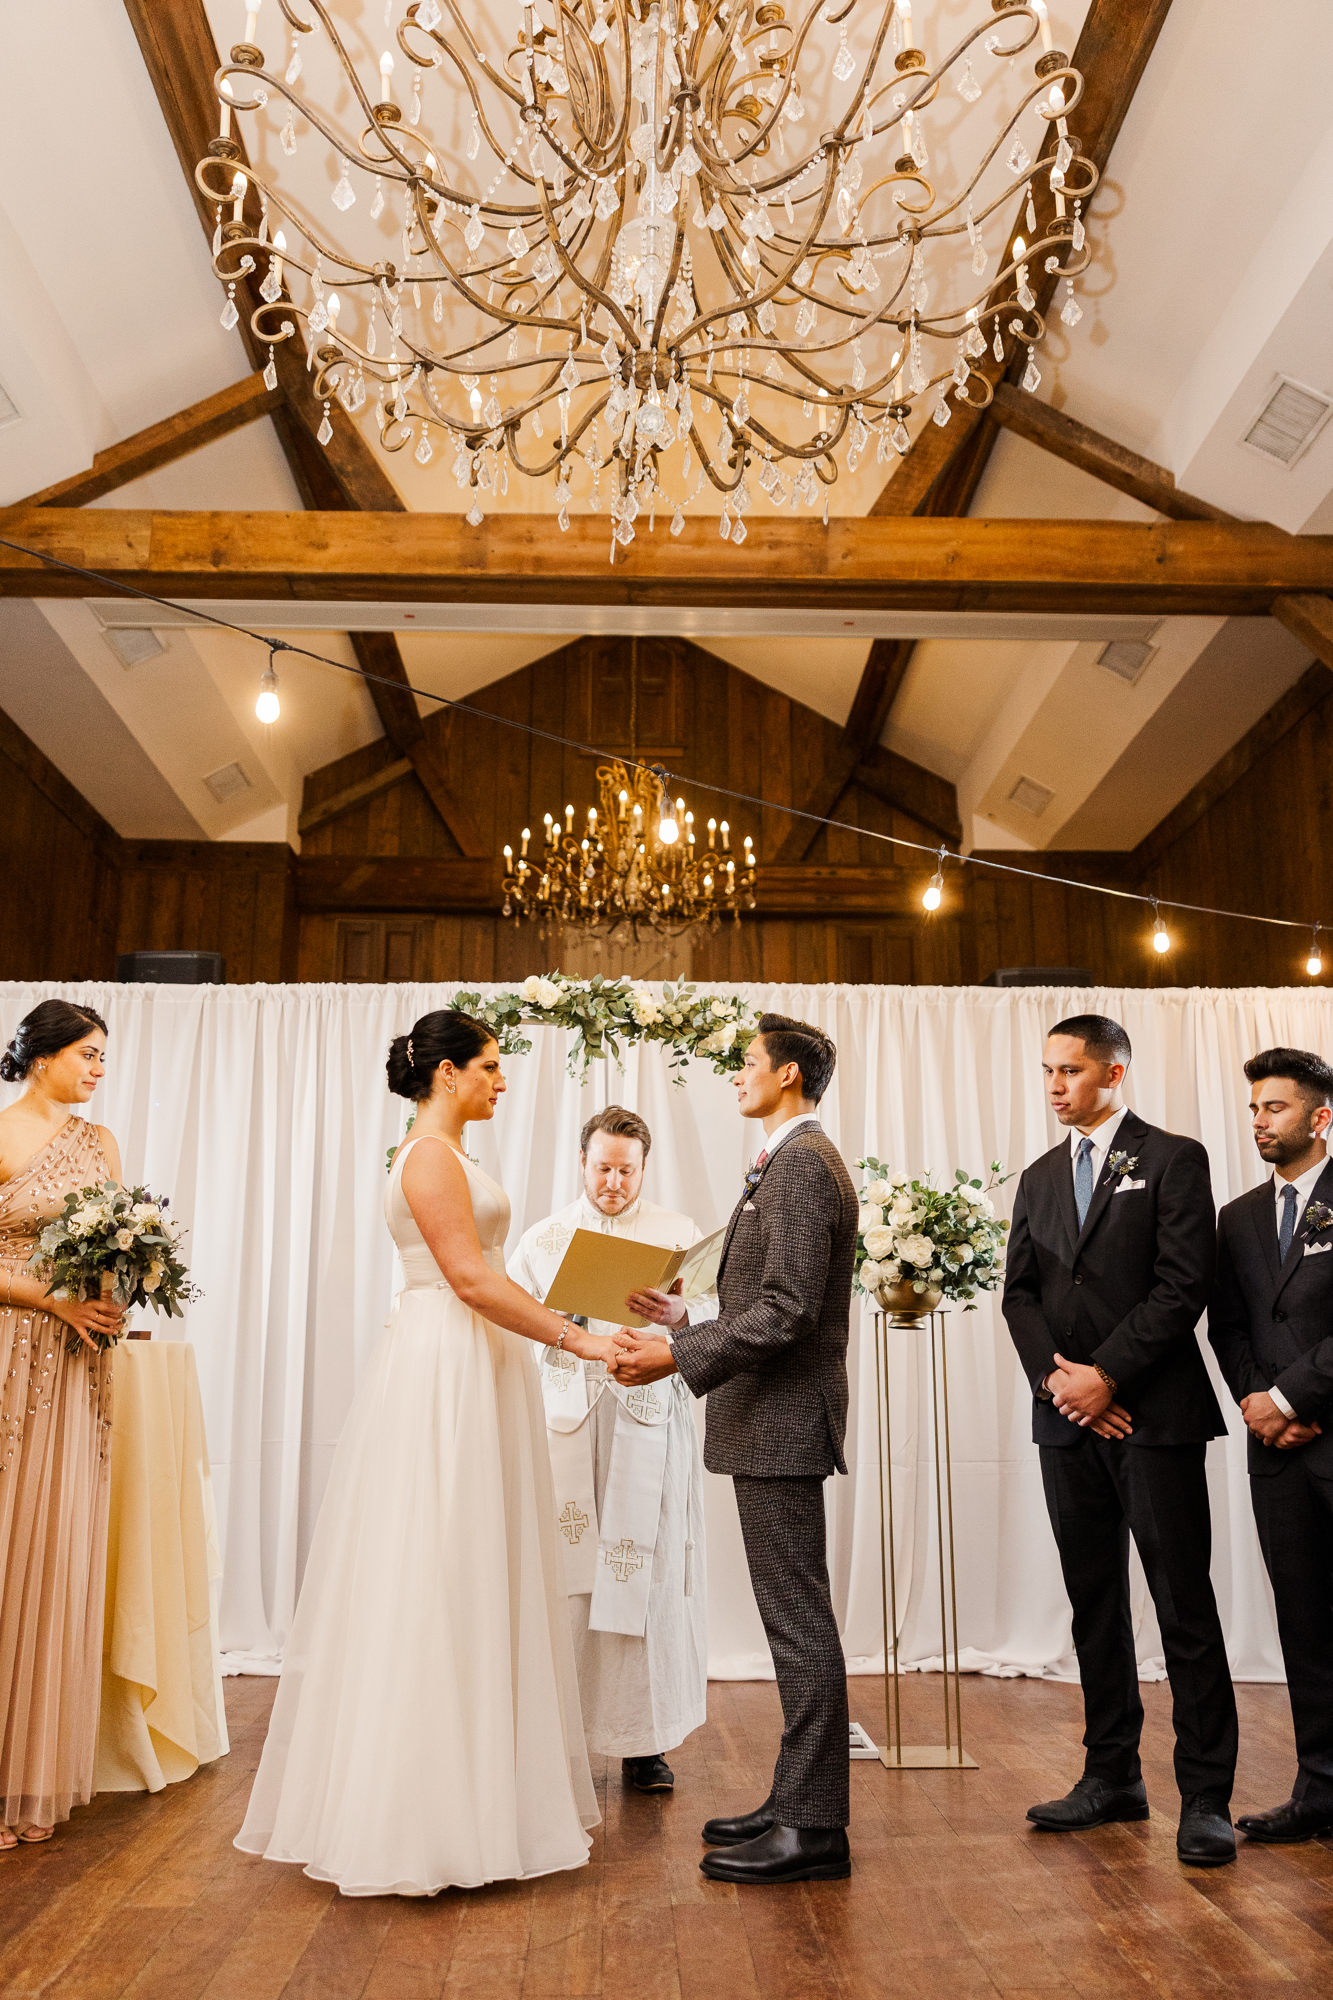 Flawless Normandy Farm Wedding Photos in Wintery Blue Bell, PA